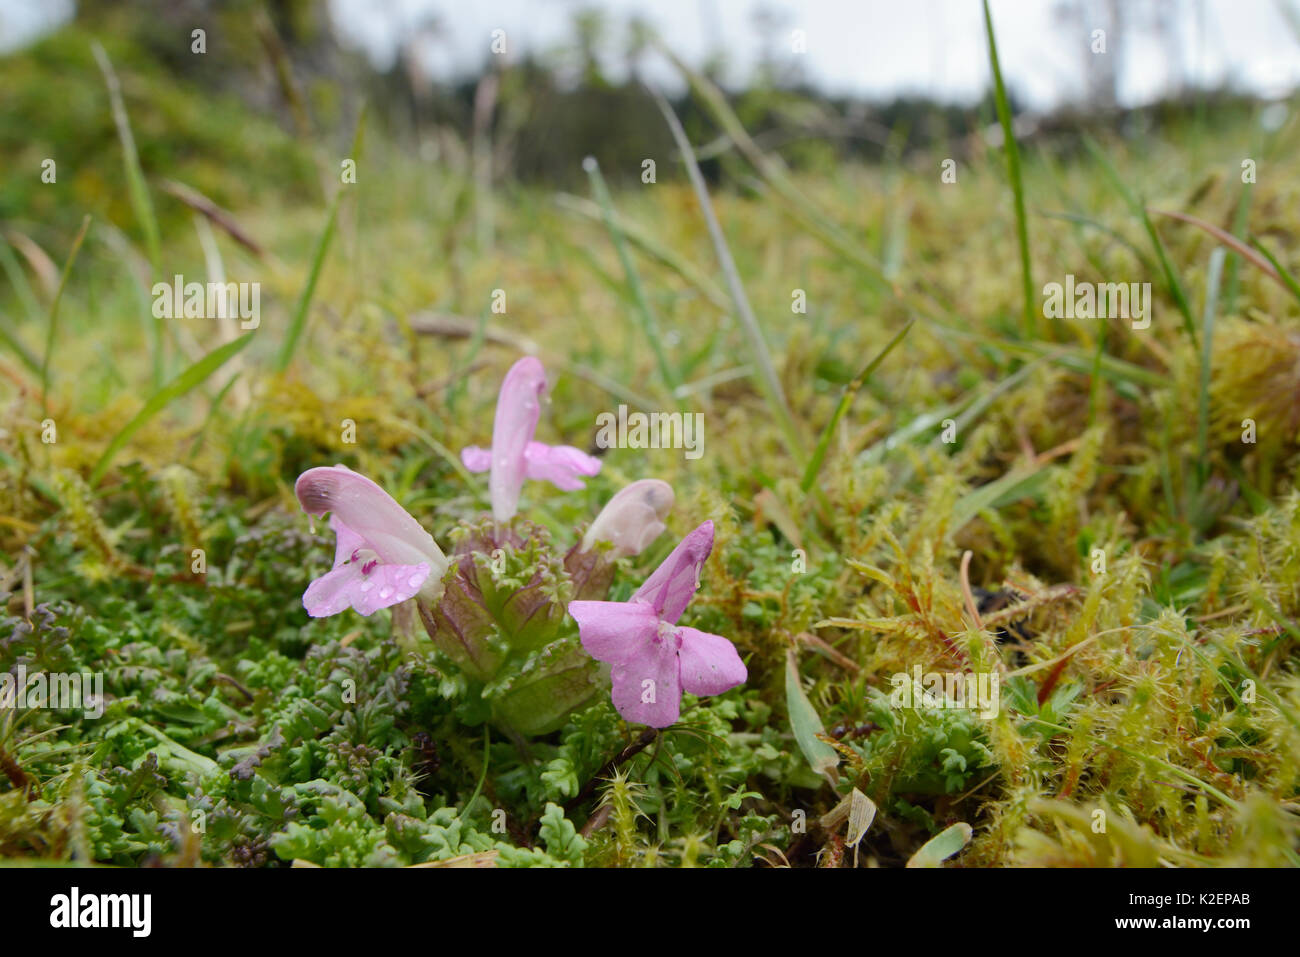 Low wide angle view of Lousewort (Pedicularis sylvatica) flowering on boggy moorland ground, partially parasitic on the roots of nearby plants, Bodmin moor, Cornwall, UK, May. Stock Photo